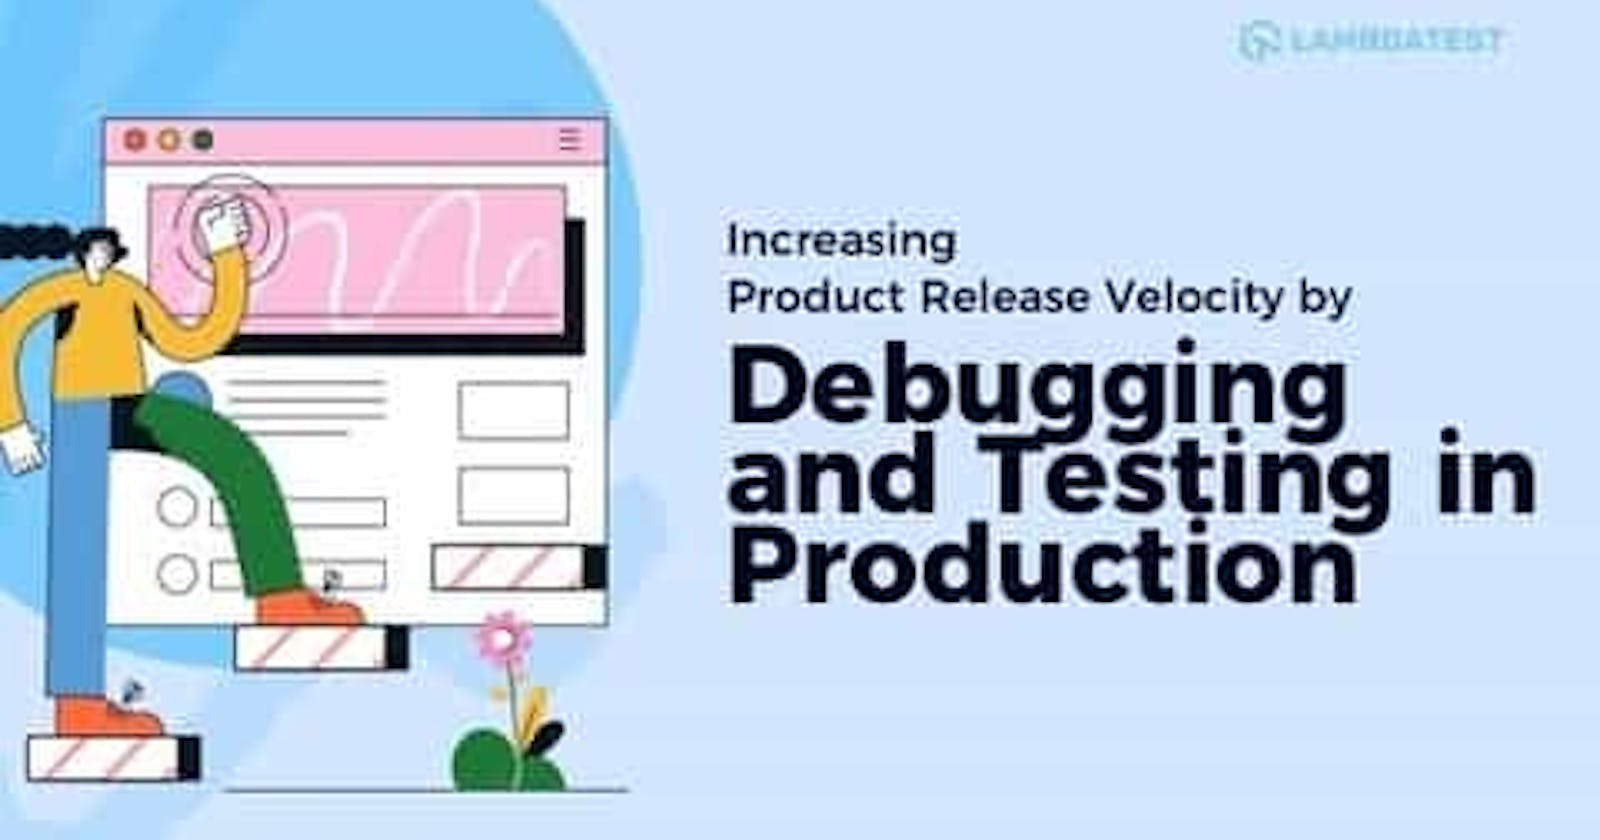 Increasing Product Release Velocity by Debugging and Testing In Production